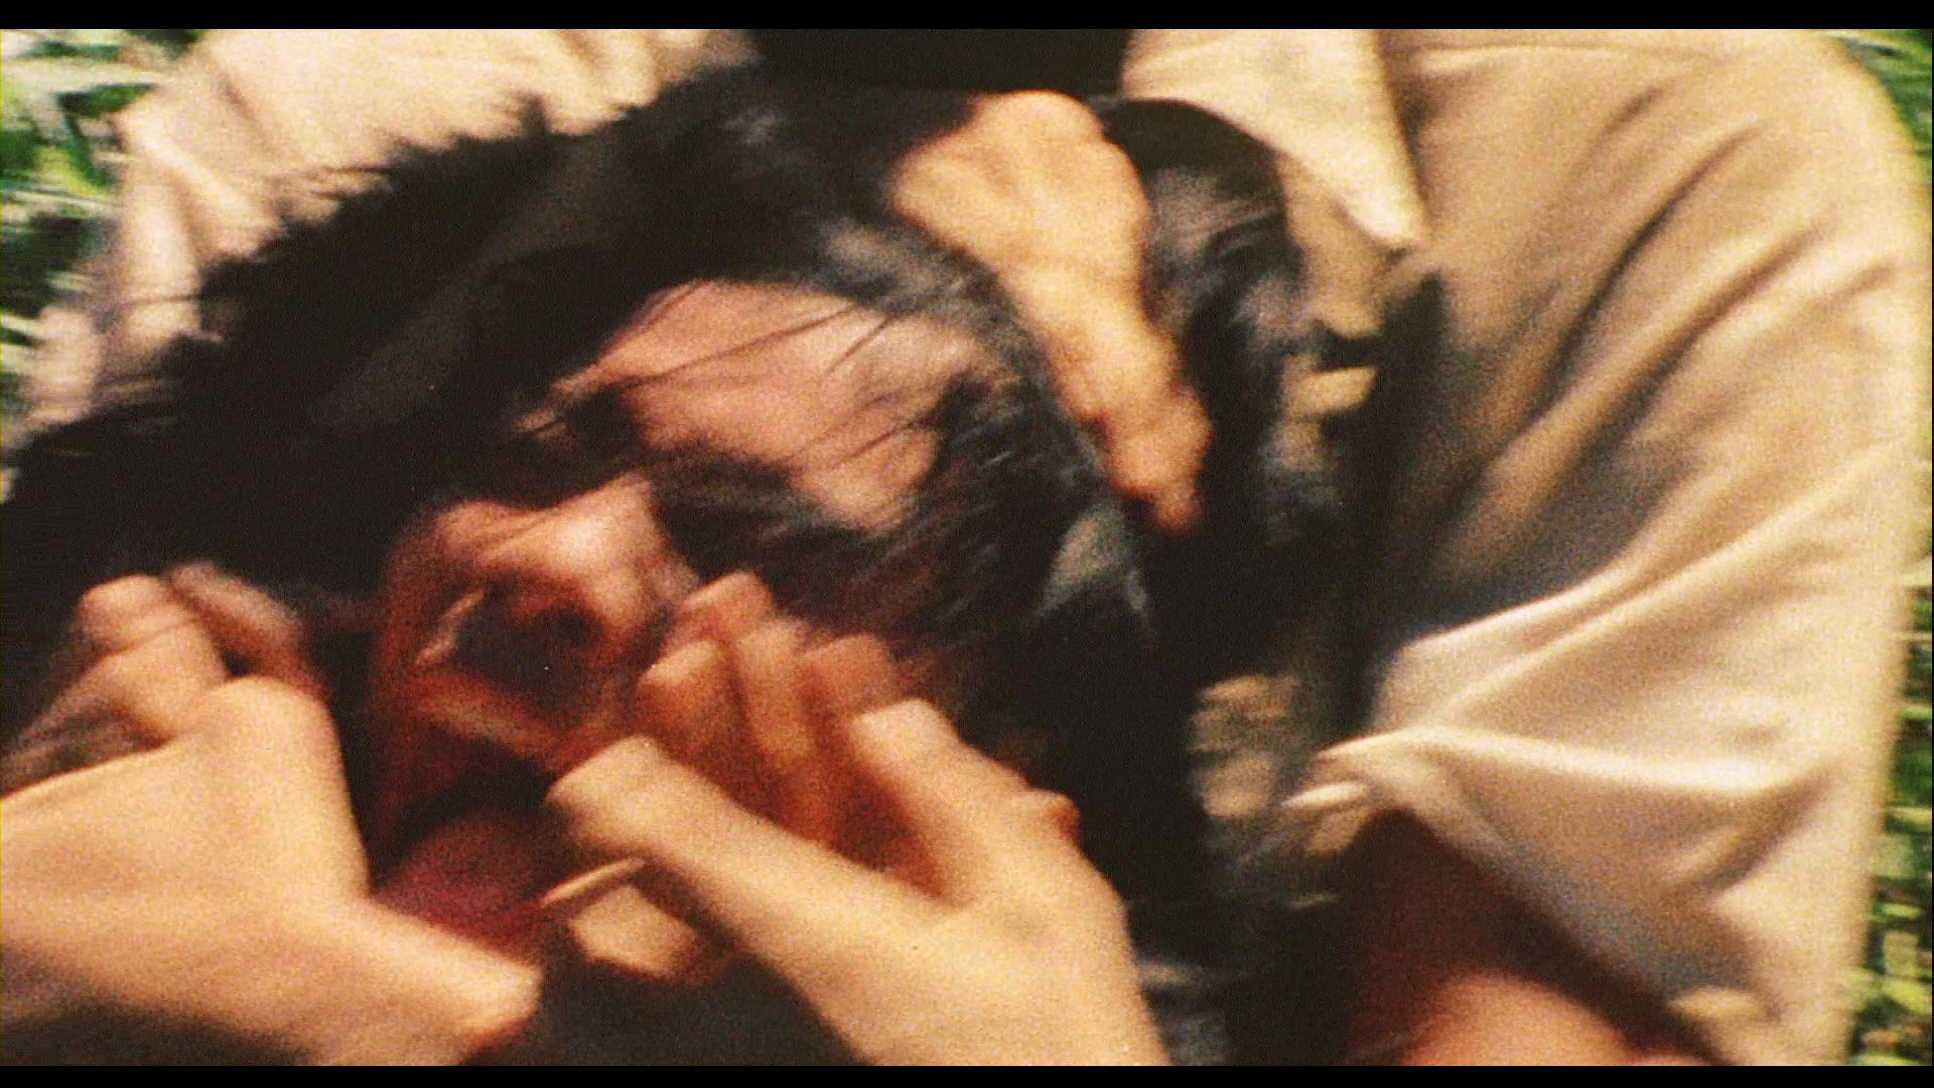 anastasia chang recommends Cannibal Holocaust Rape Scene